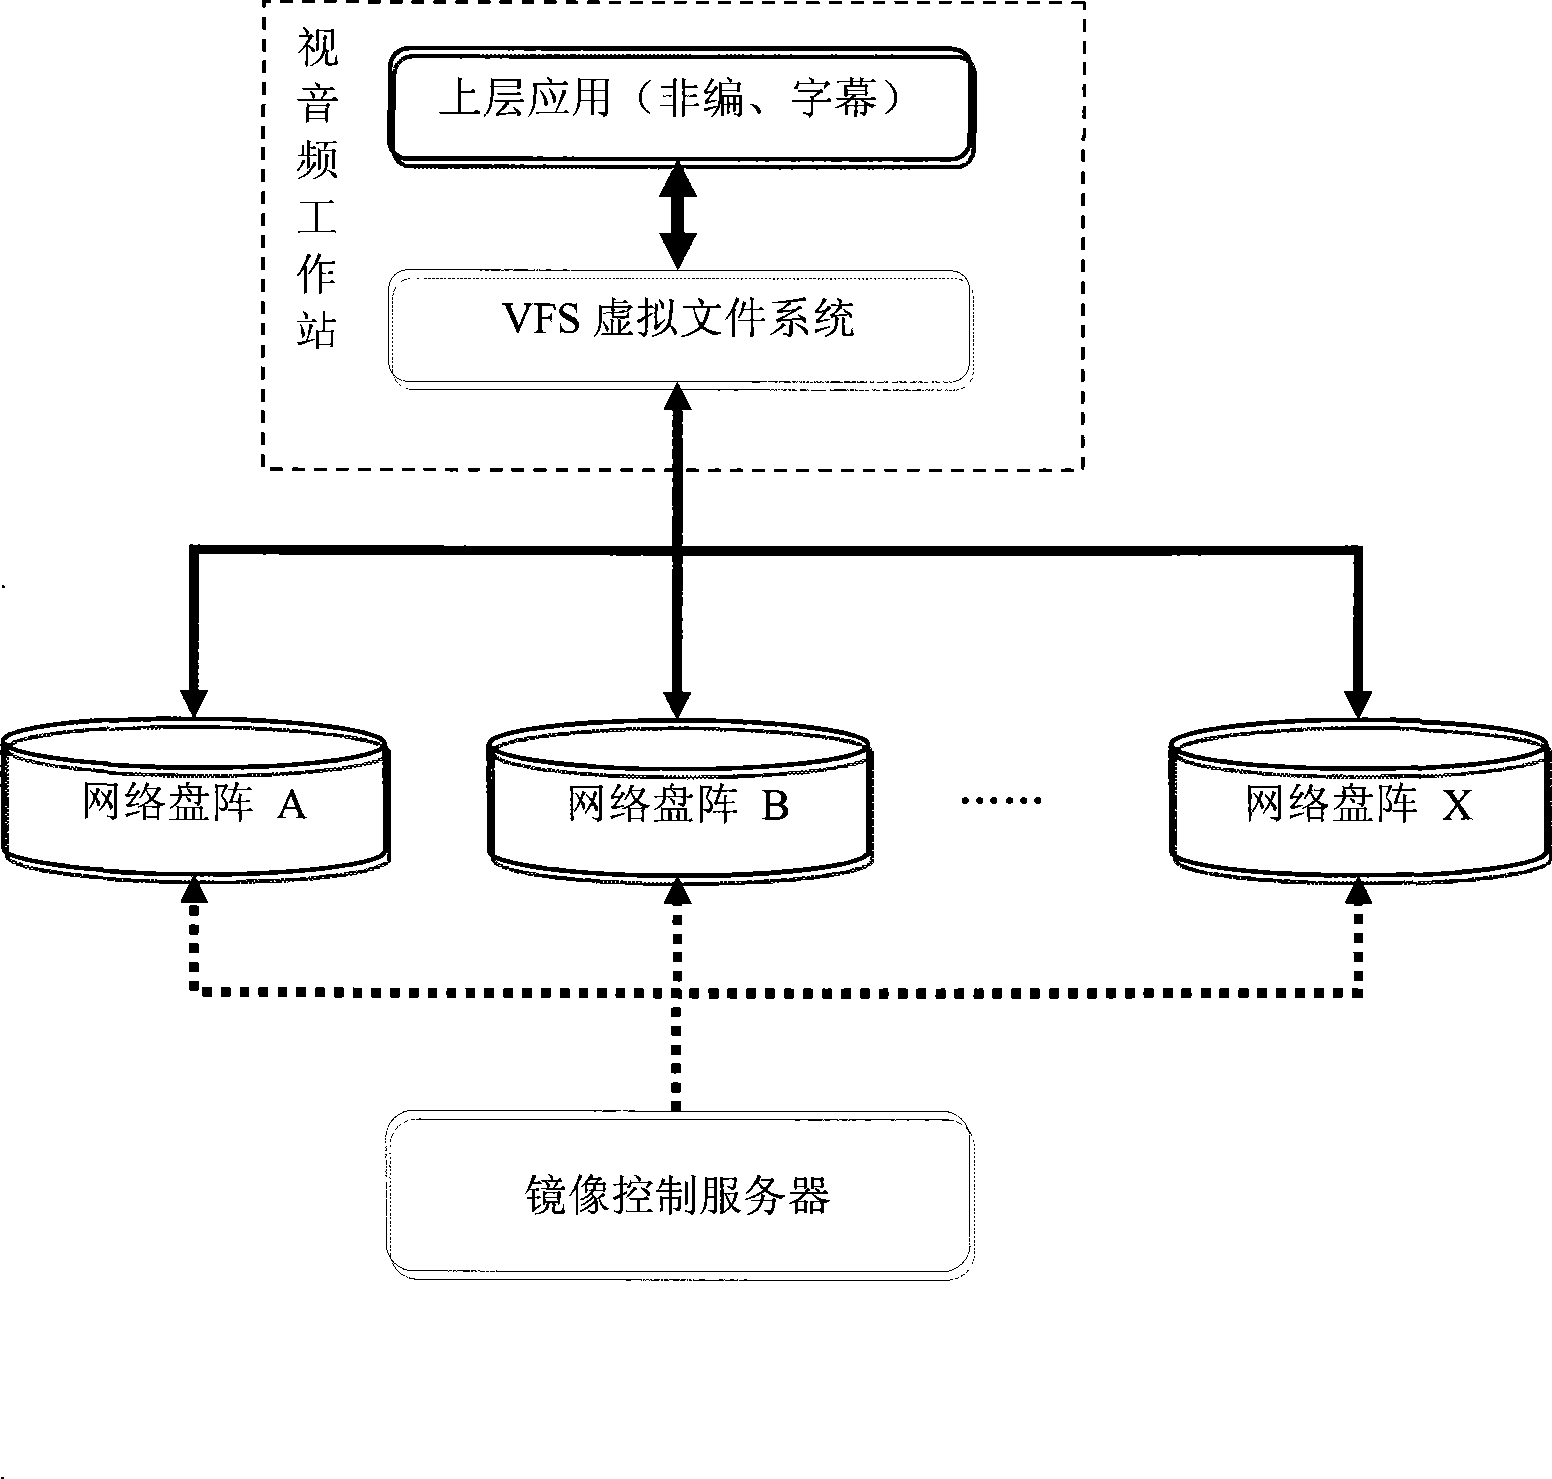 Method and system for implementing image storage by virtual file system technique